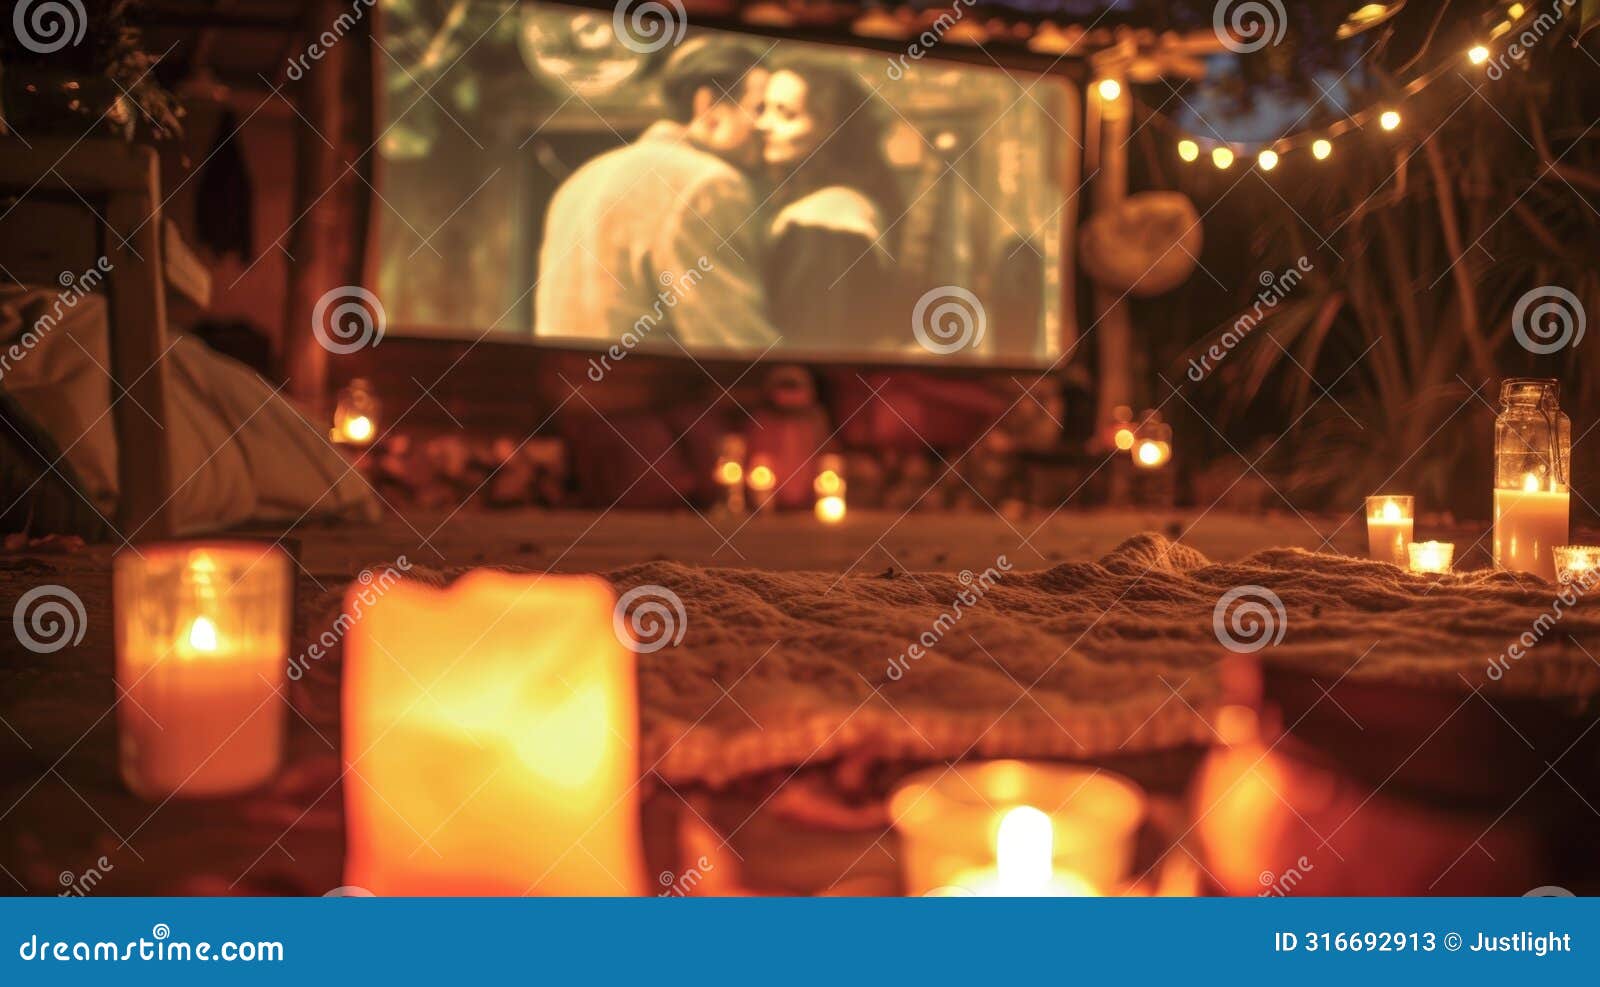 a makeshift outdoor theater complete with an oldfashioned movie screen candles and a blazing fire. 2d flat cartoon